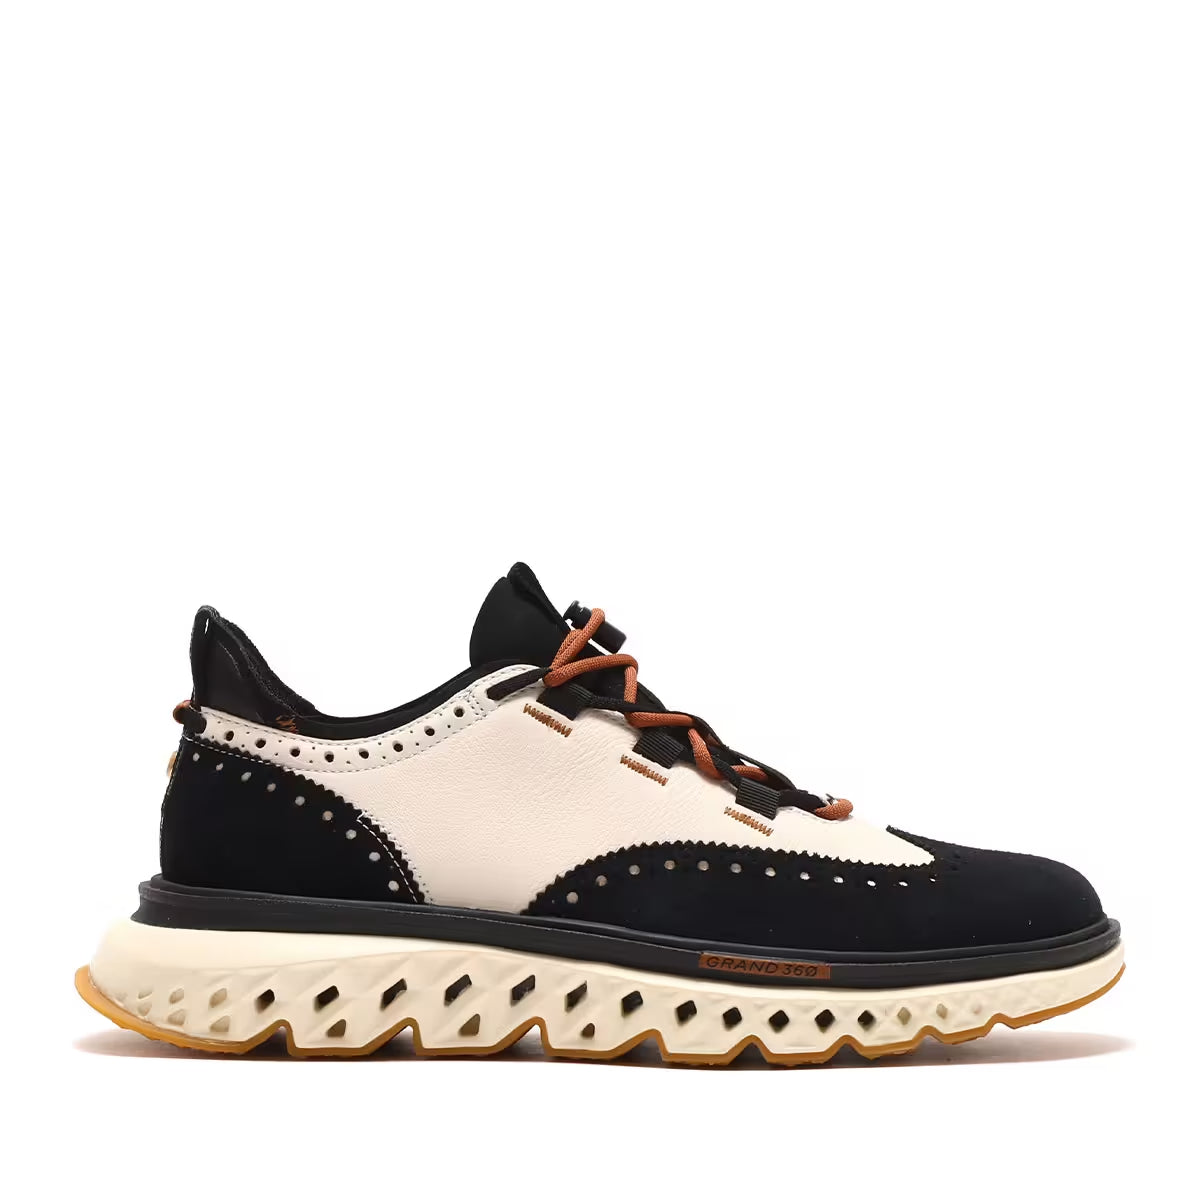 COLE HAAN CH X ATMOS 5 ZEROGRAND WING OX